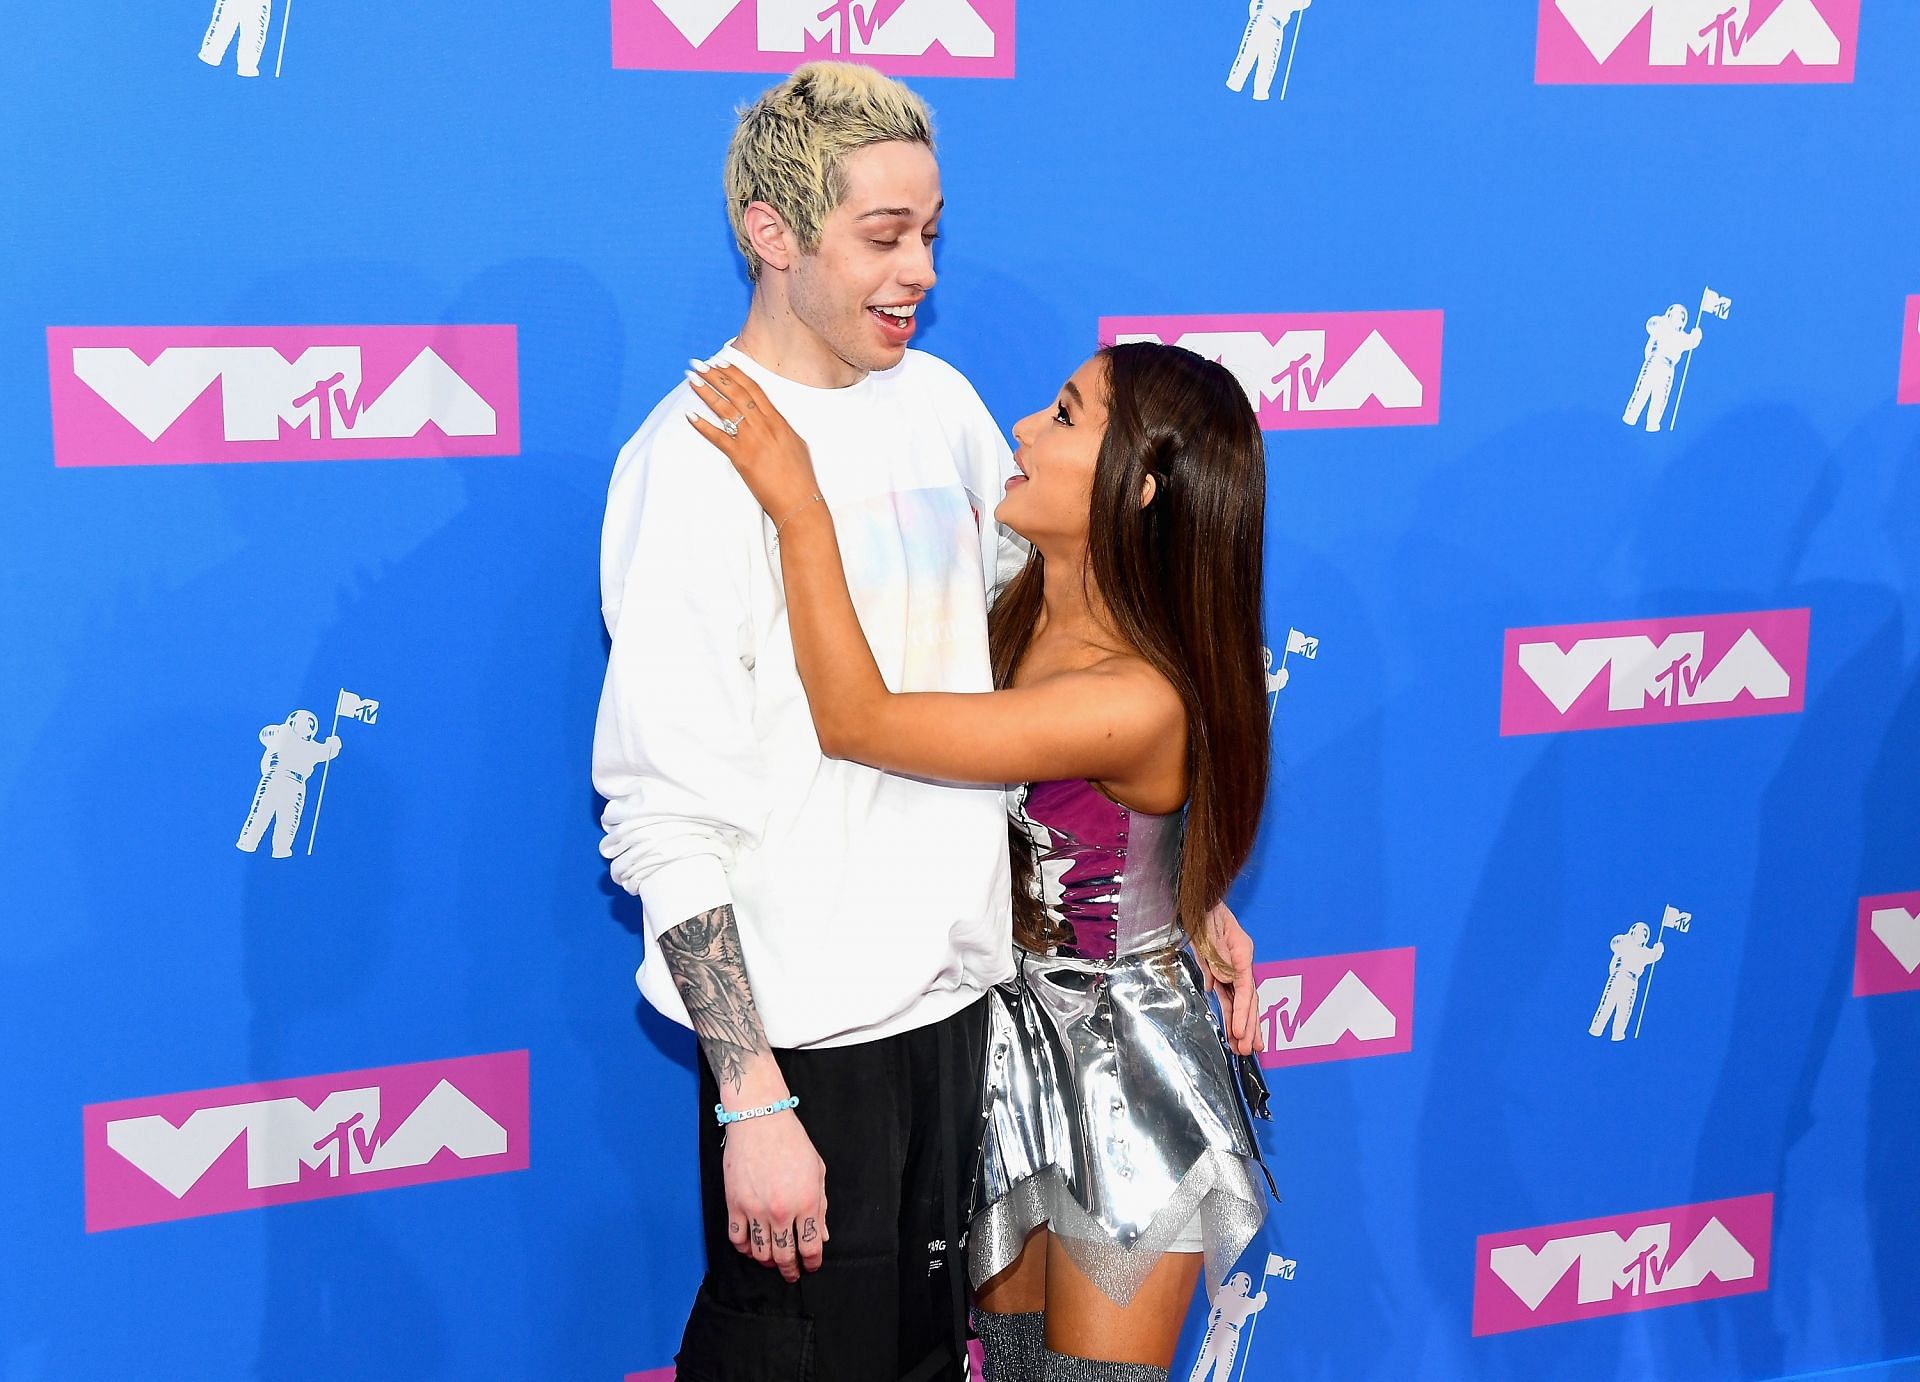 Grand and Pete Davidson in the 2018 MTV Video Music Awards - Arrivals (Image via Getty/Nicholas Hunt)